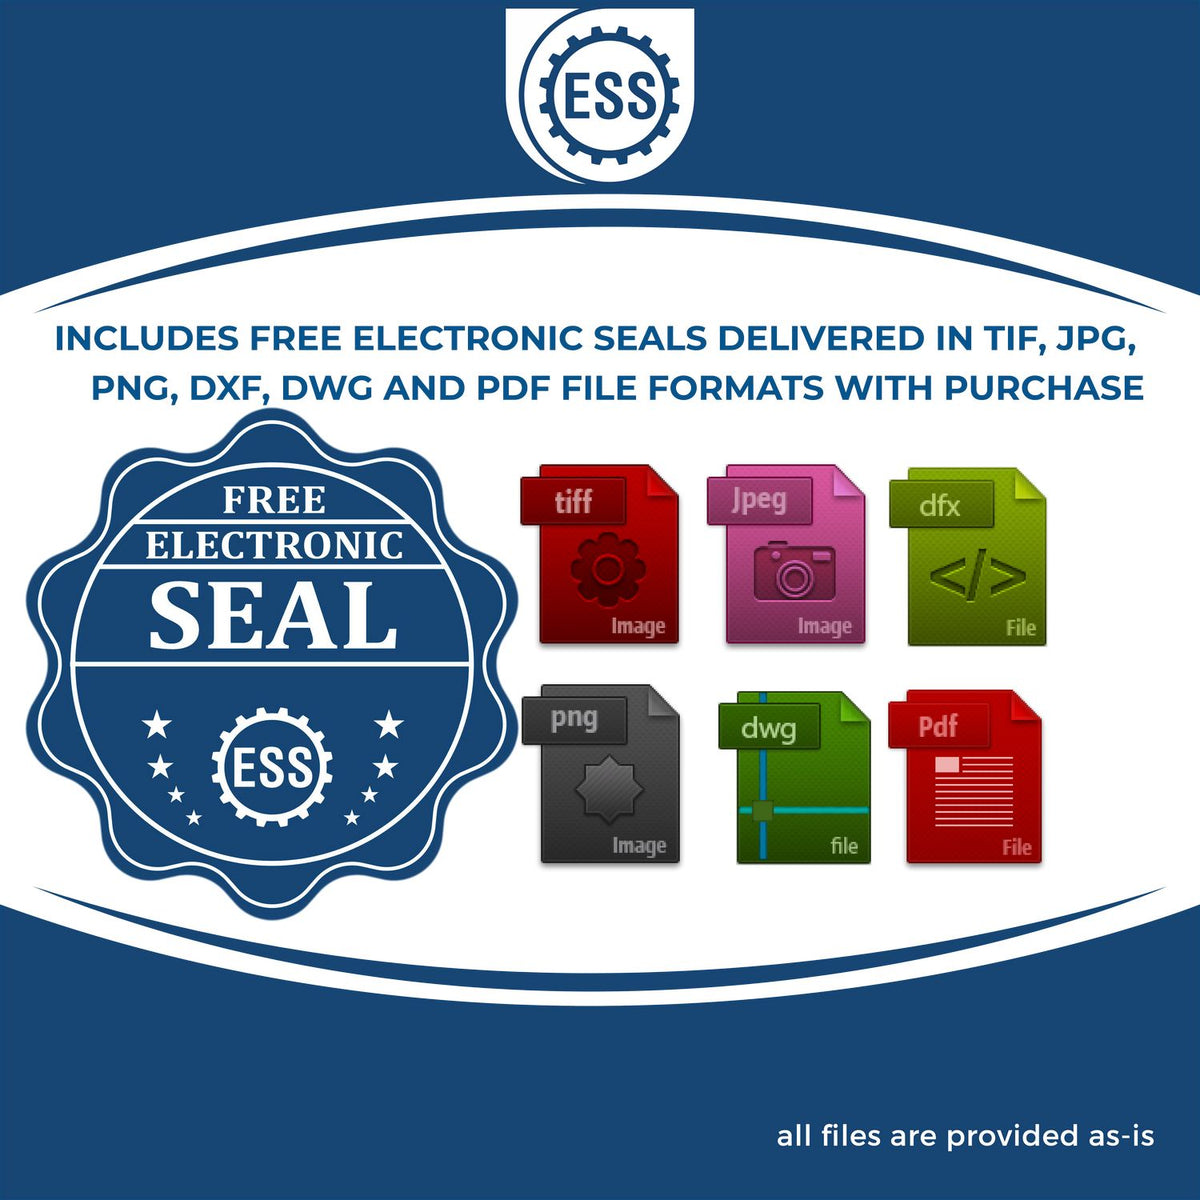 An infographic for the free electronic seal for the Premium MaxLight Pre-Inked Georgia Geology Stamp illustrating the different file type icons such as DXF, DWG, TIF, JPG and PNG.